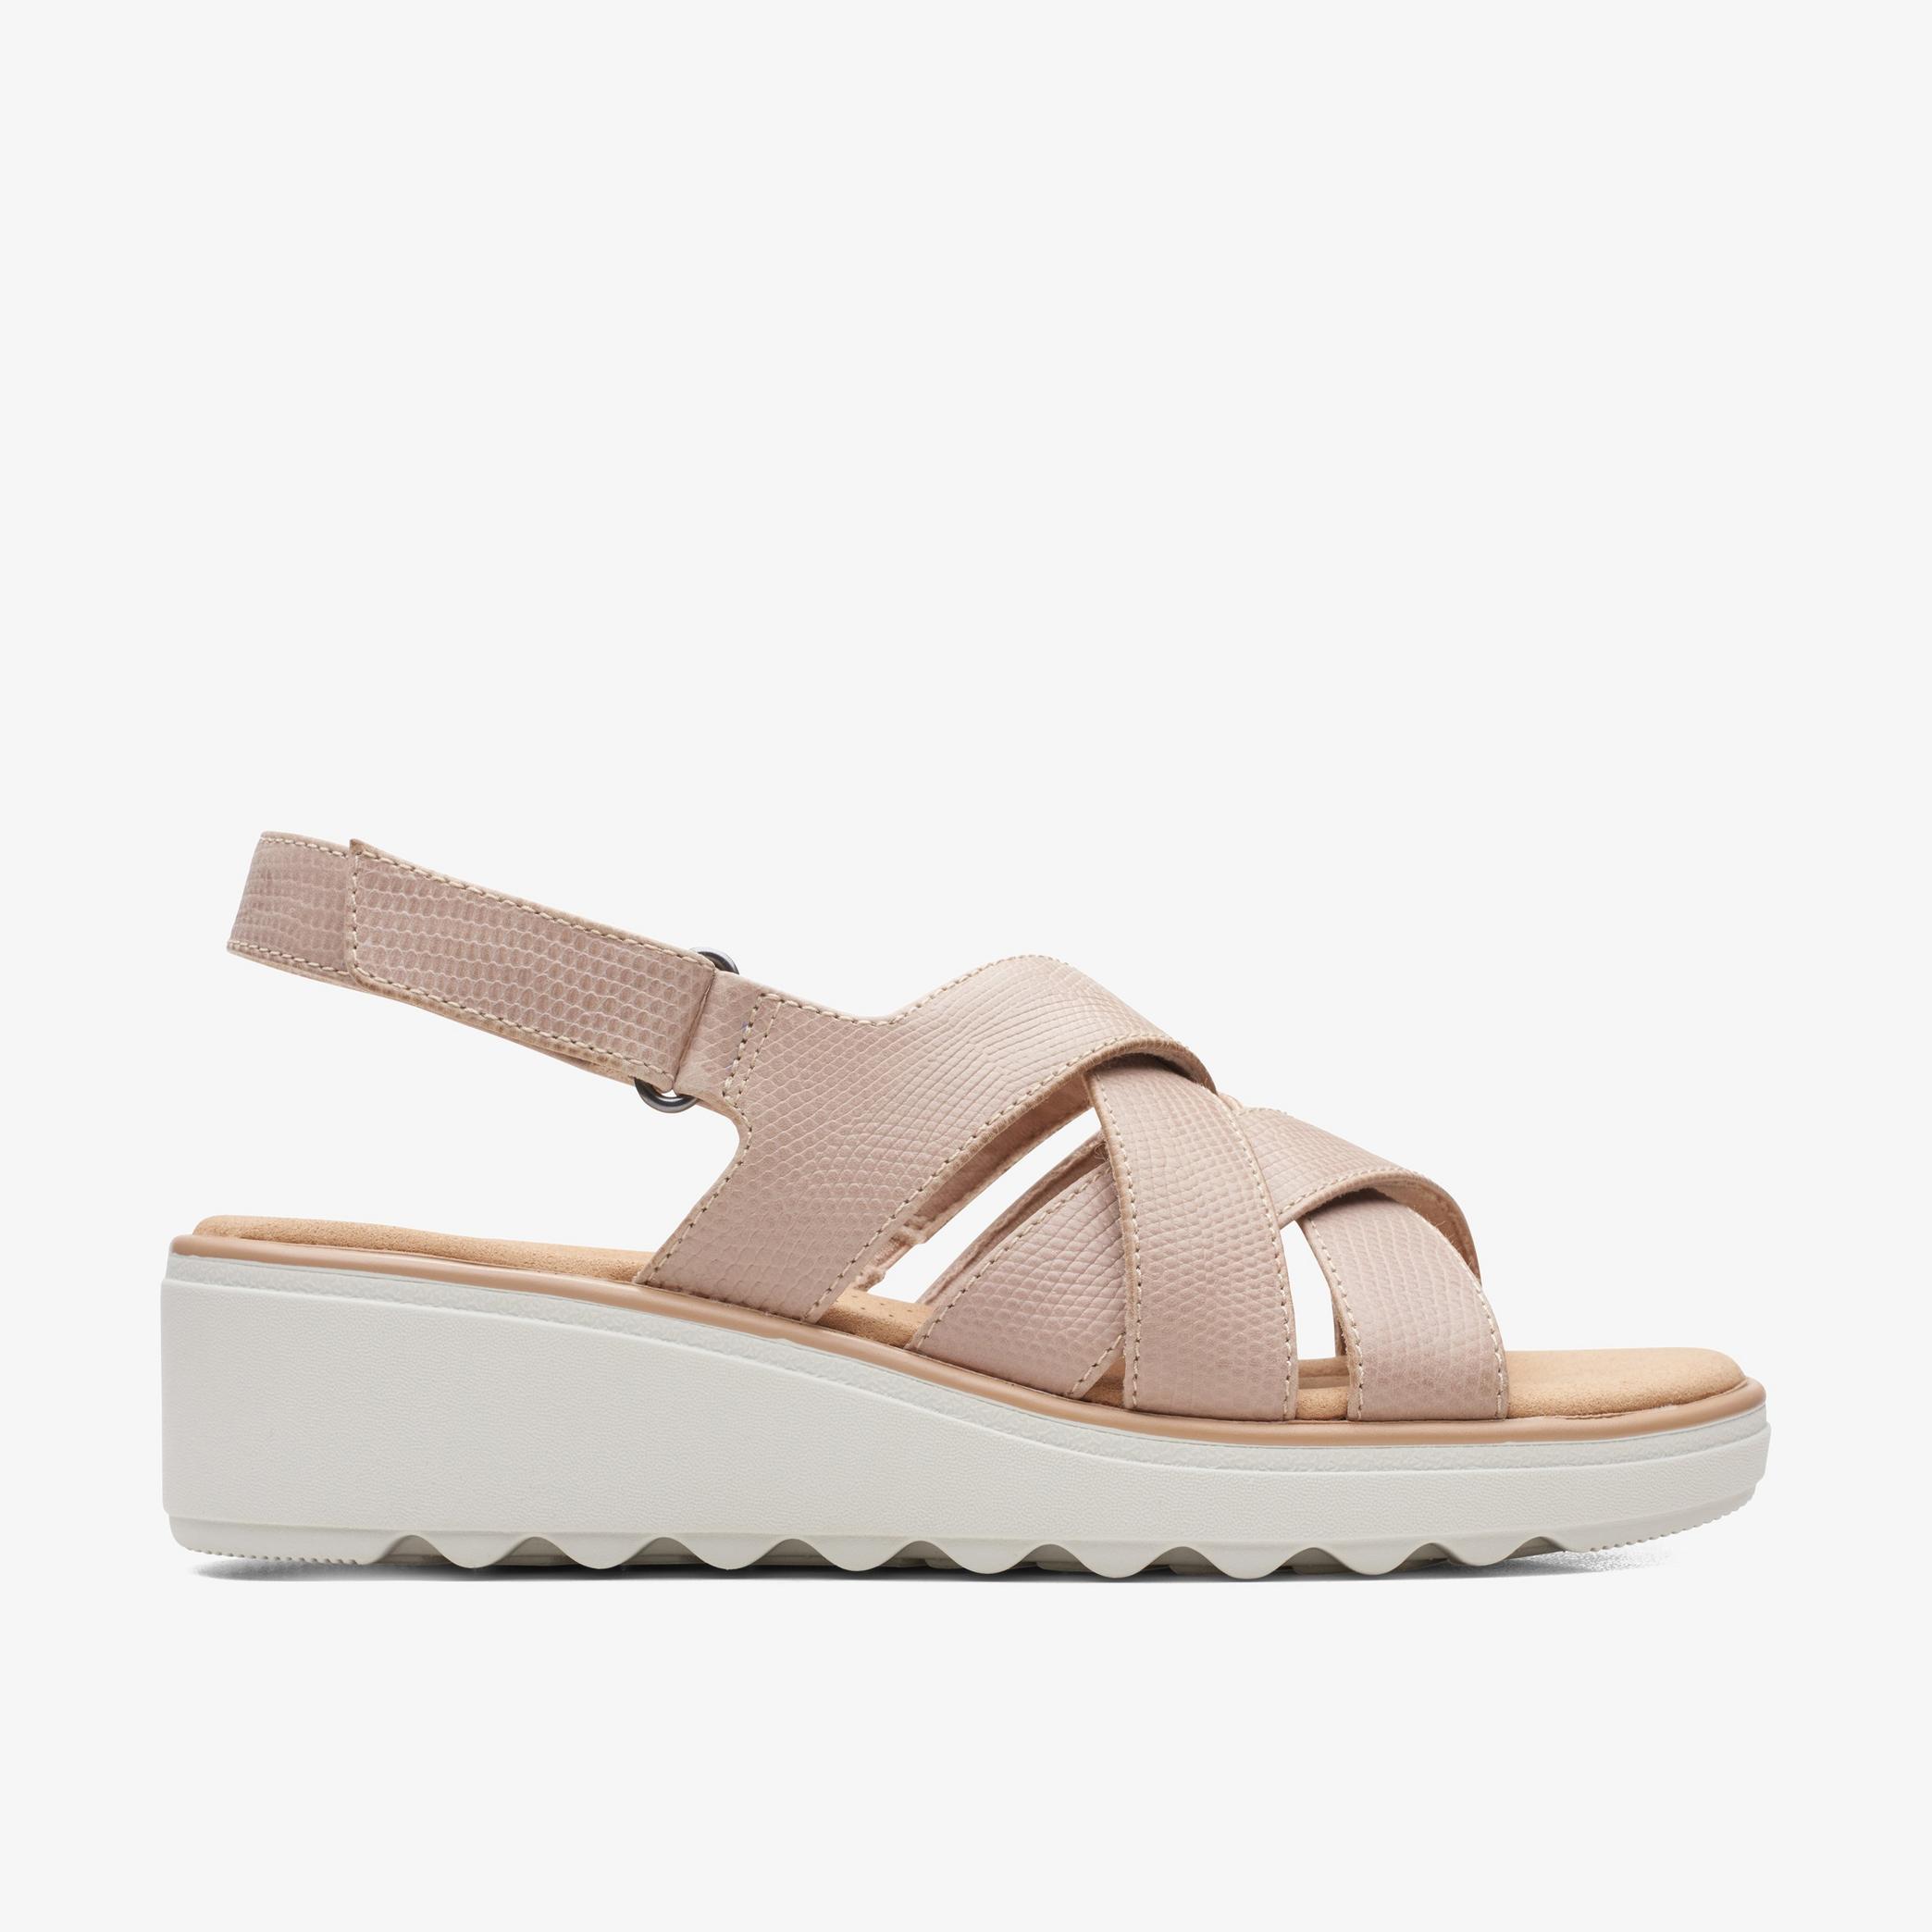 WOMENS Jillian Spring Sand Leather Wedges | Clarks Outlet